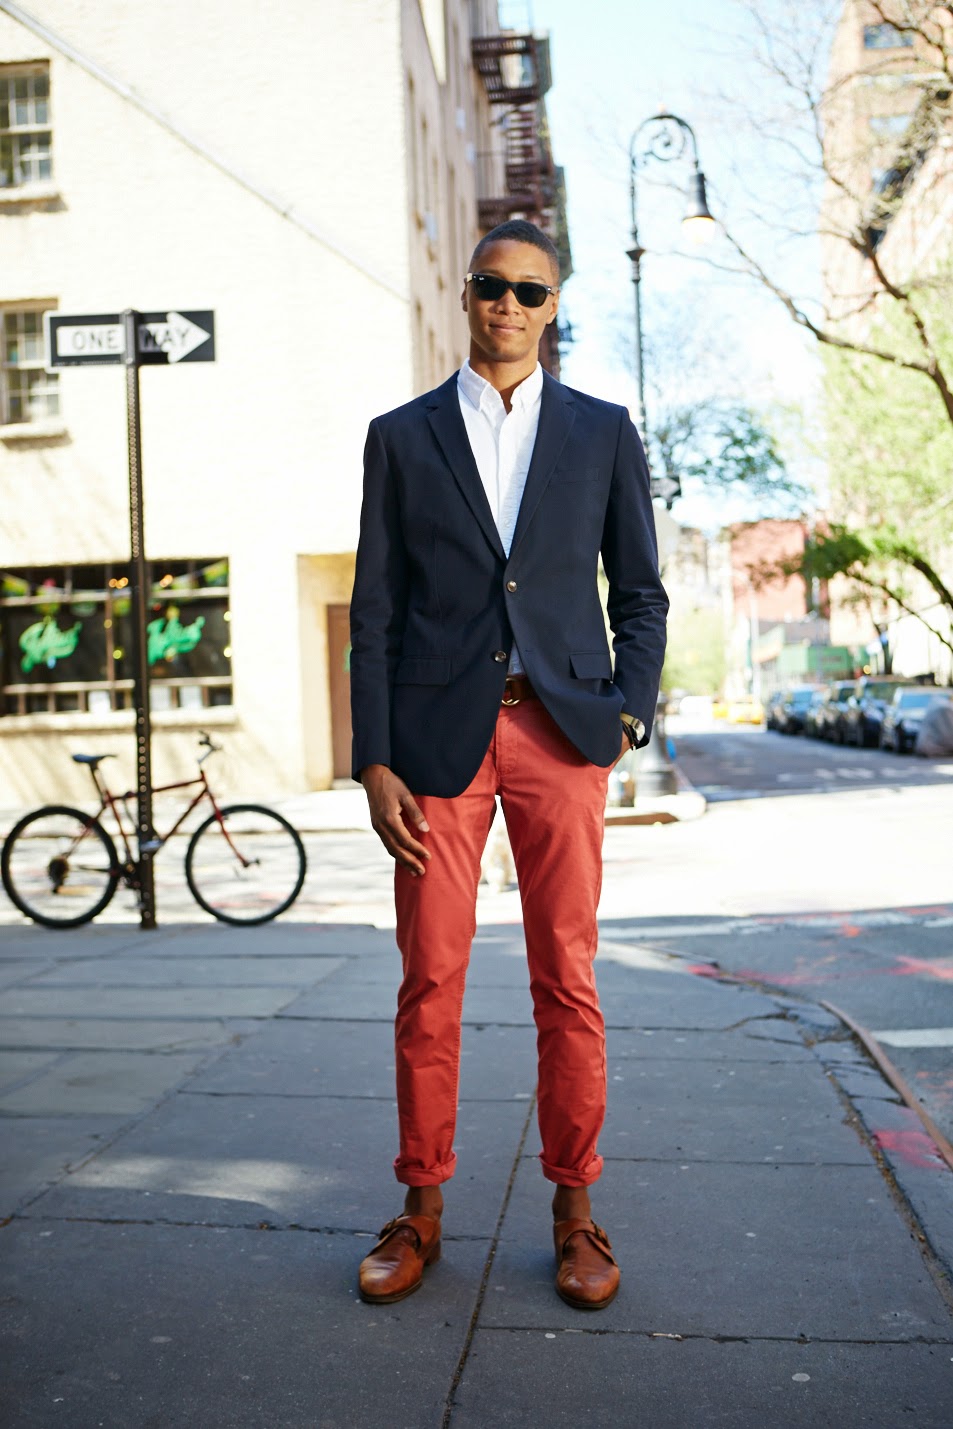 Life Through Preppy Glasses: Summer Street Style with Bonobos